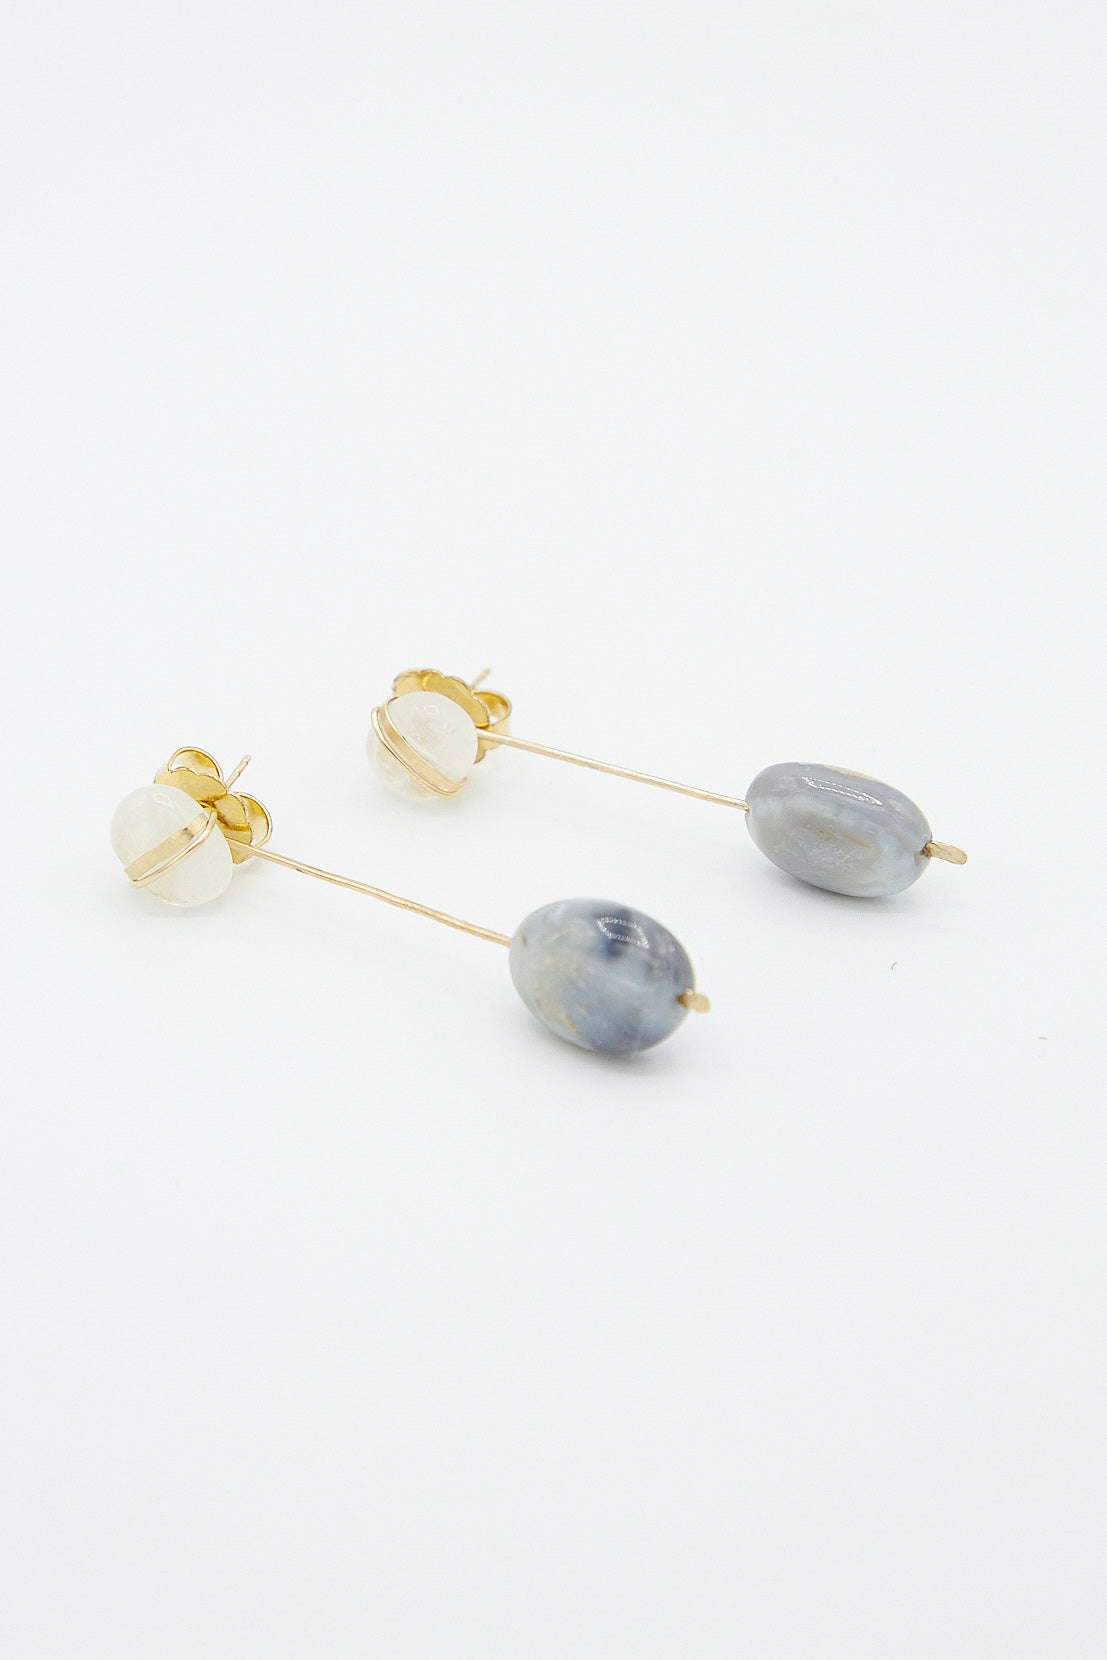 A pair of Mary MacGill Sculpture Earrings in Cottonwood II with blue and white stones.